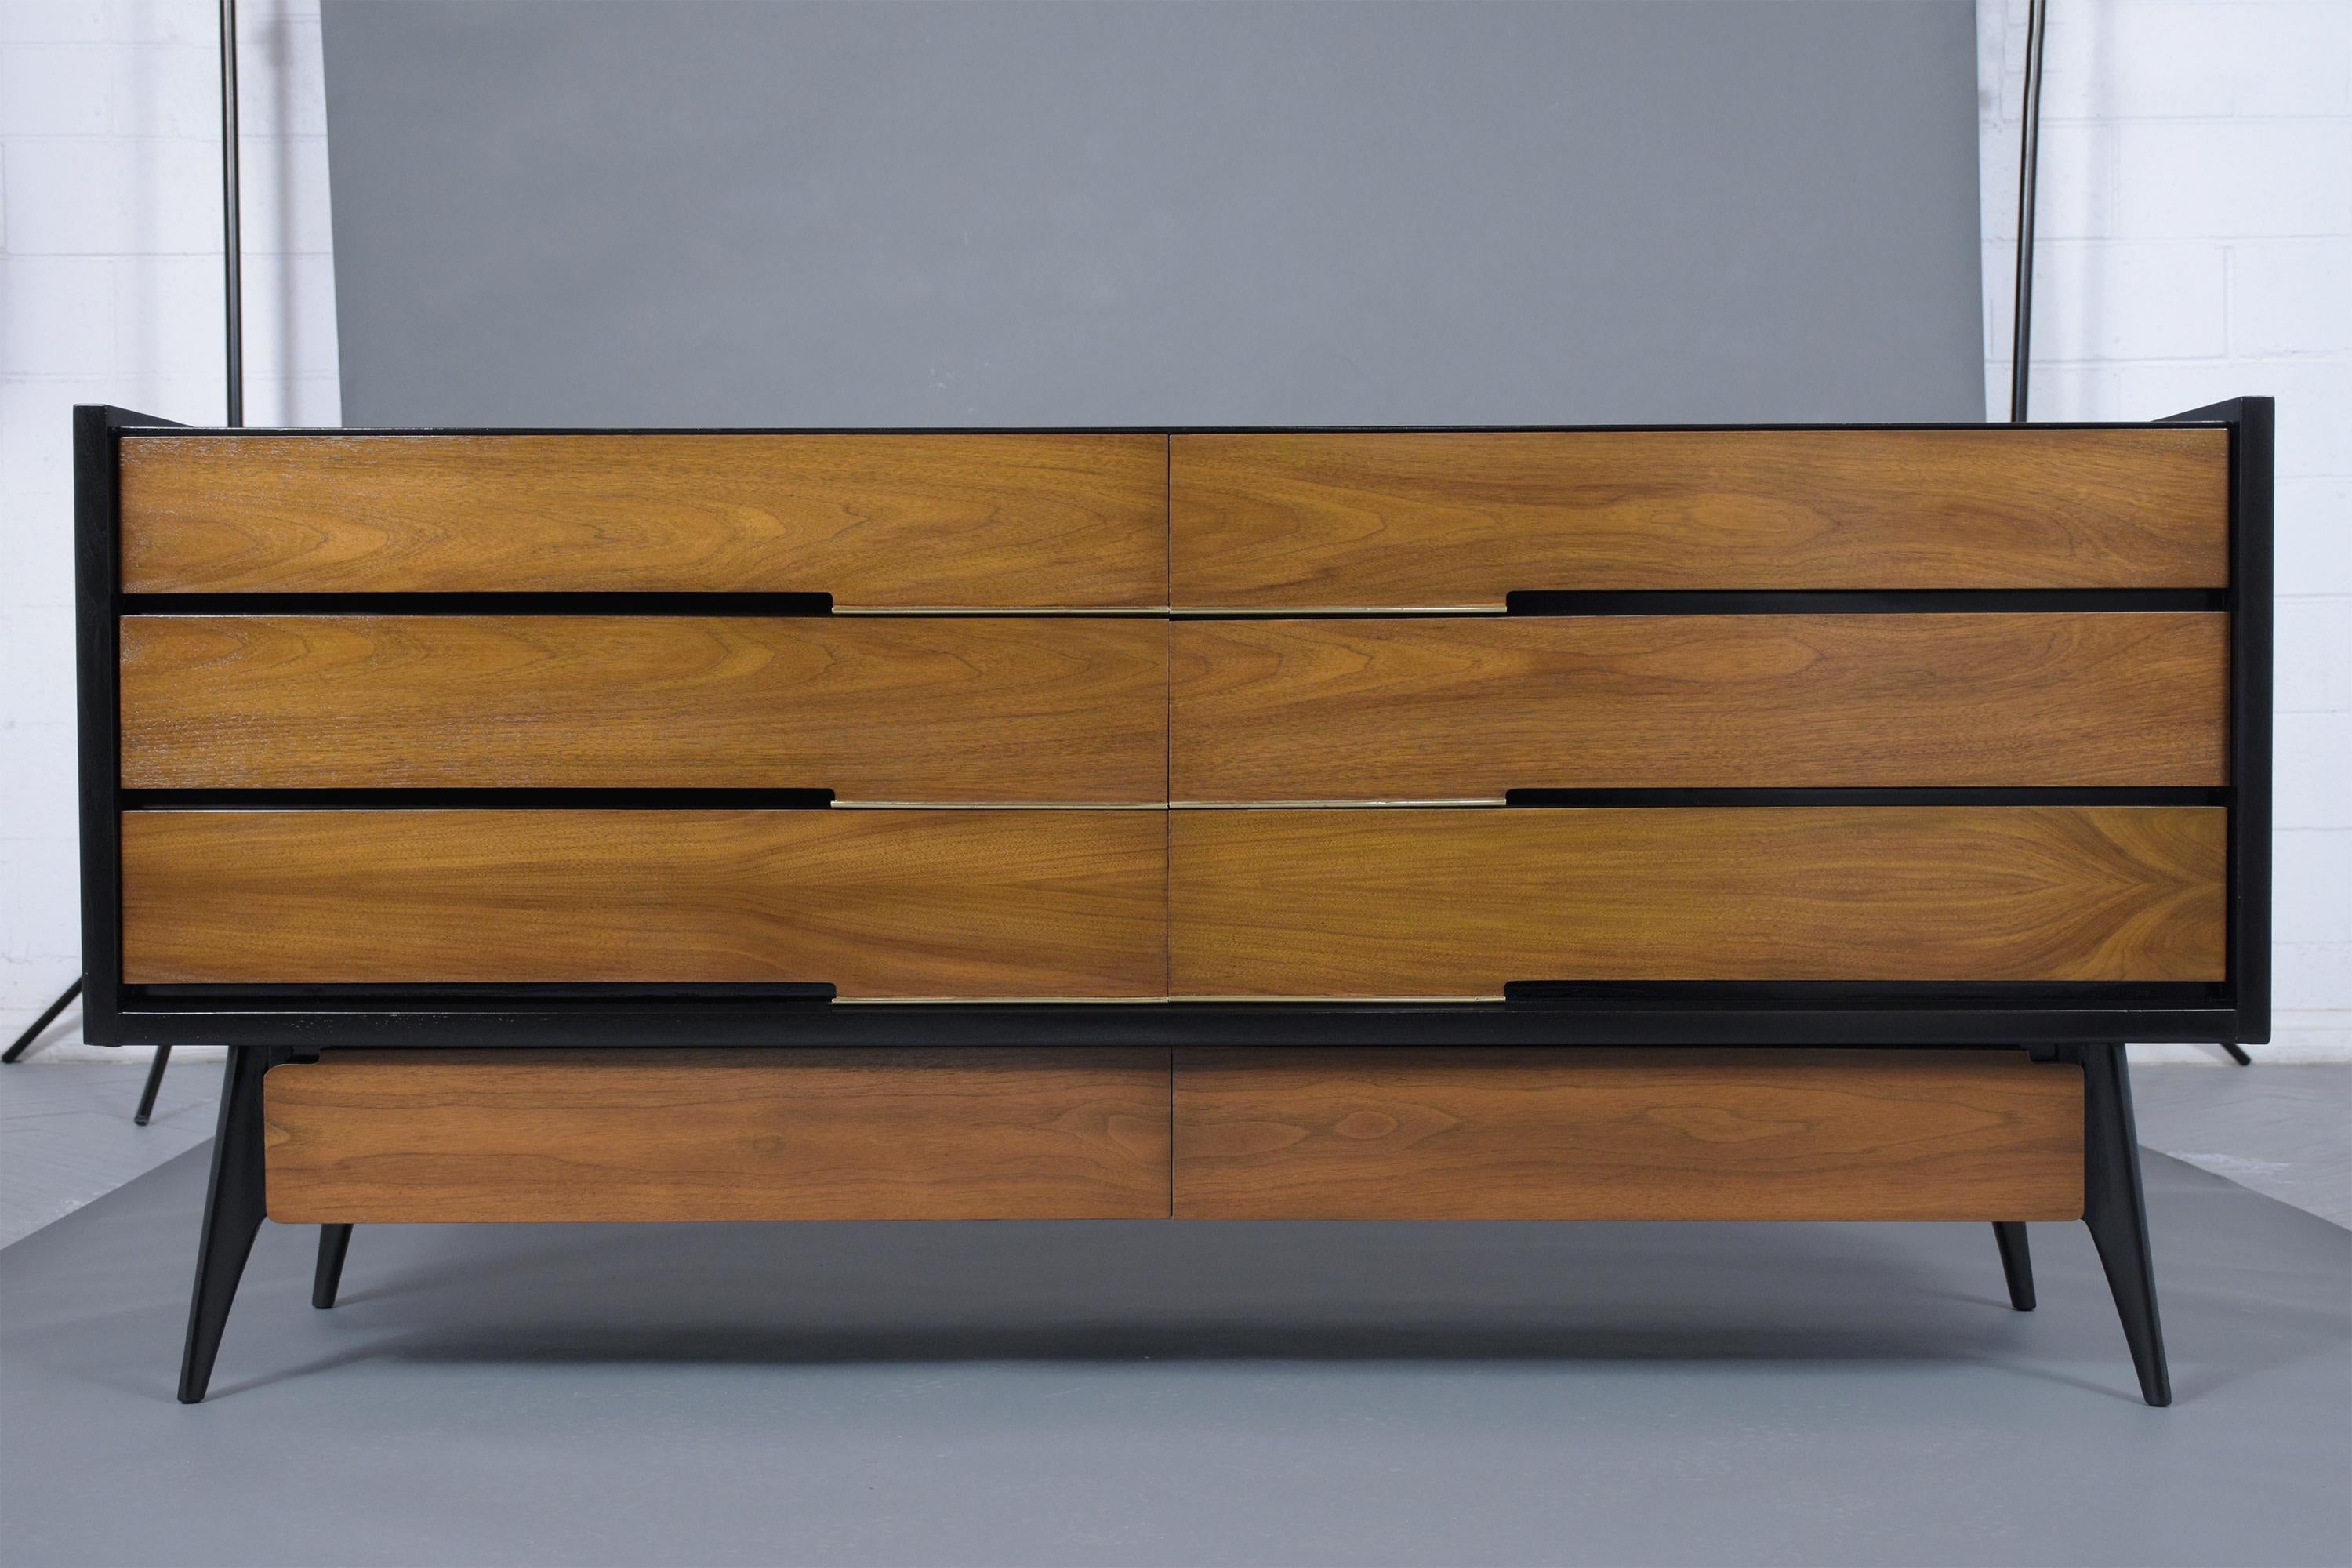 A mid-century 1960's Credenza crafted out of walnut wood, this fabulous piece has been professionally restored and has been newly stained and ebonized & walnut color combination with a lacquer finish. This Chest of Drawers features plenty of